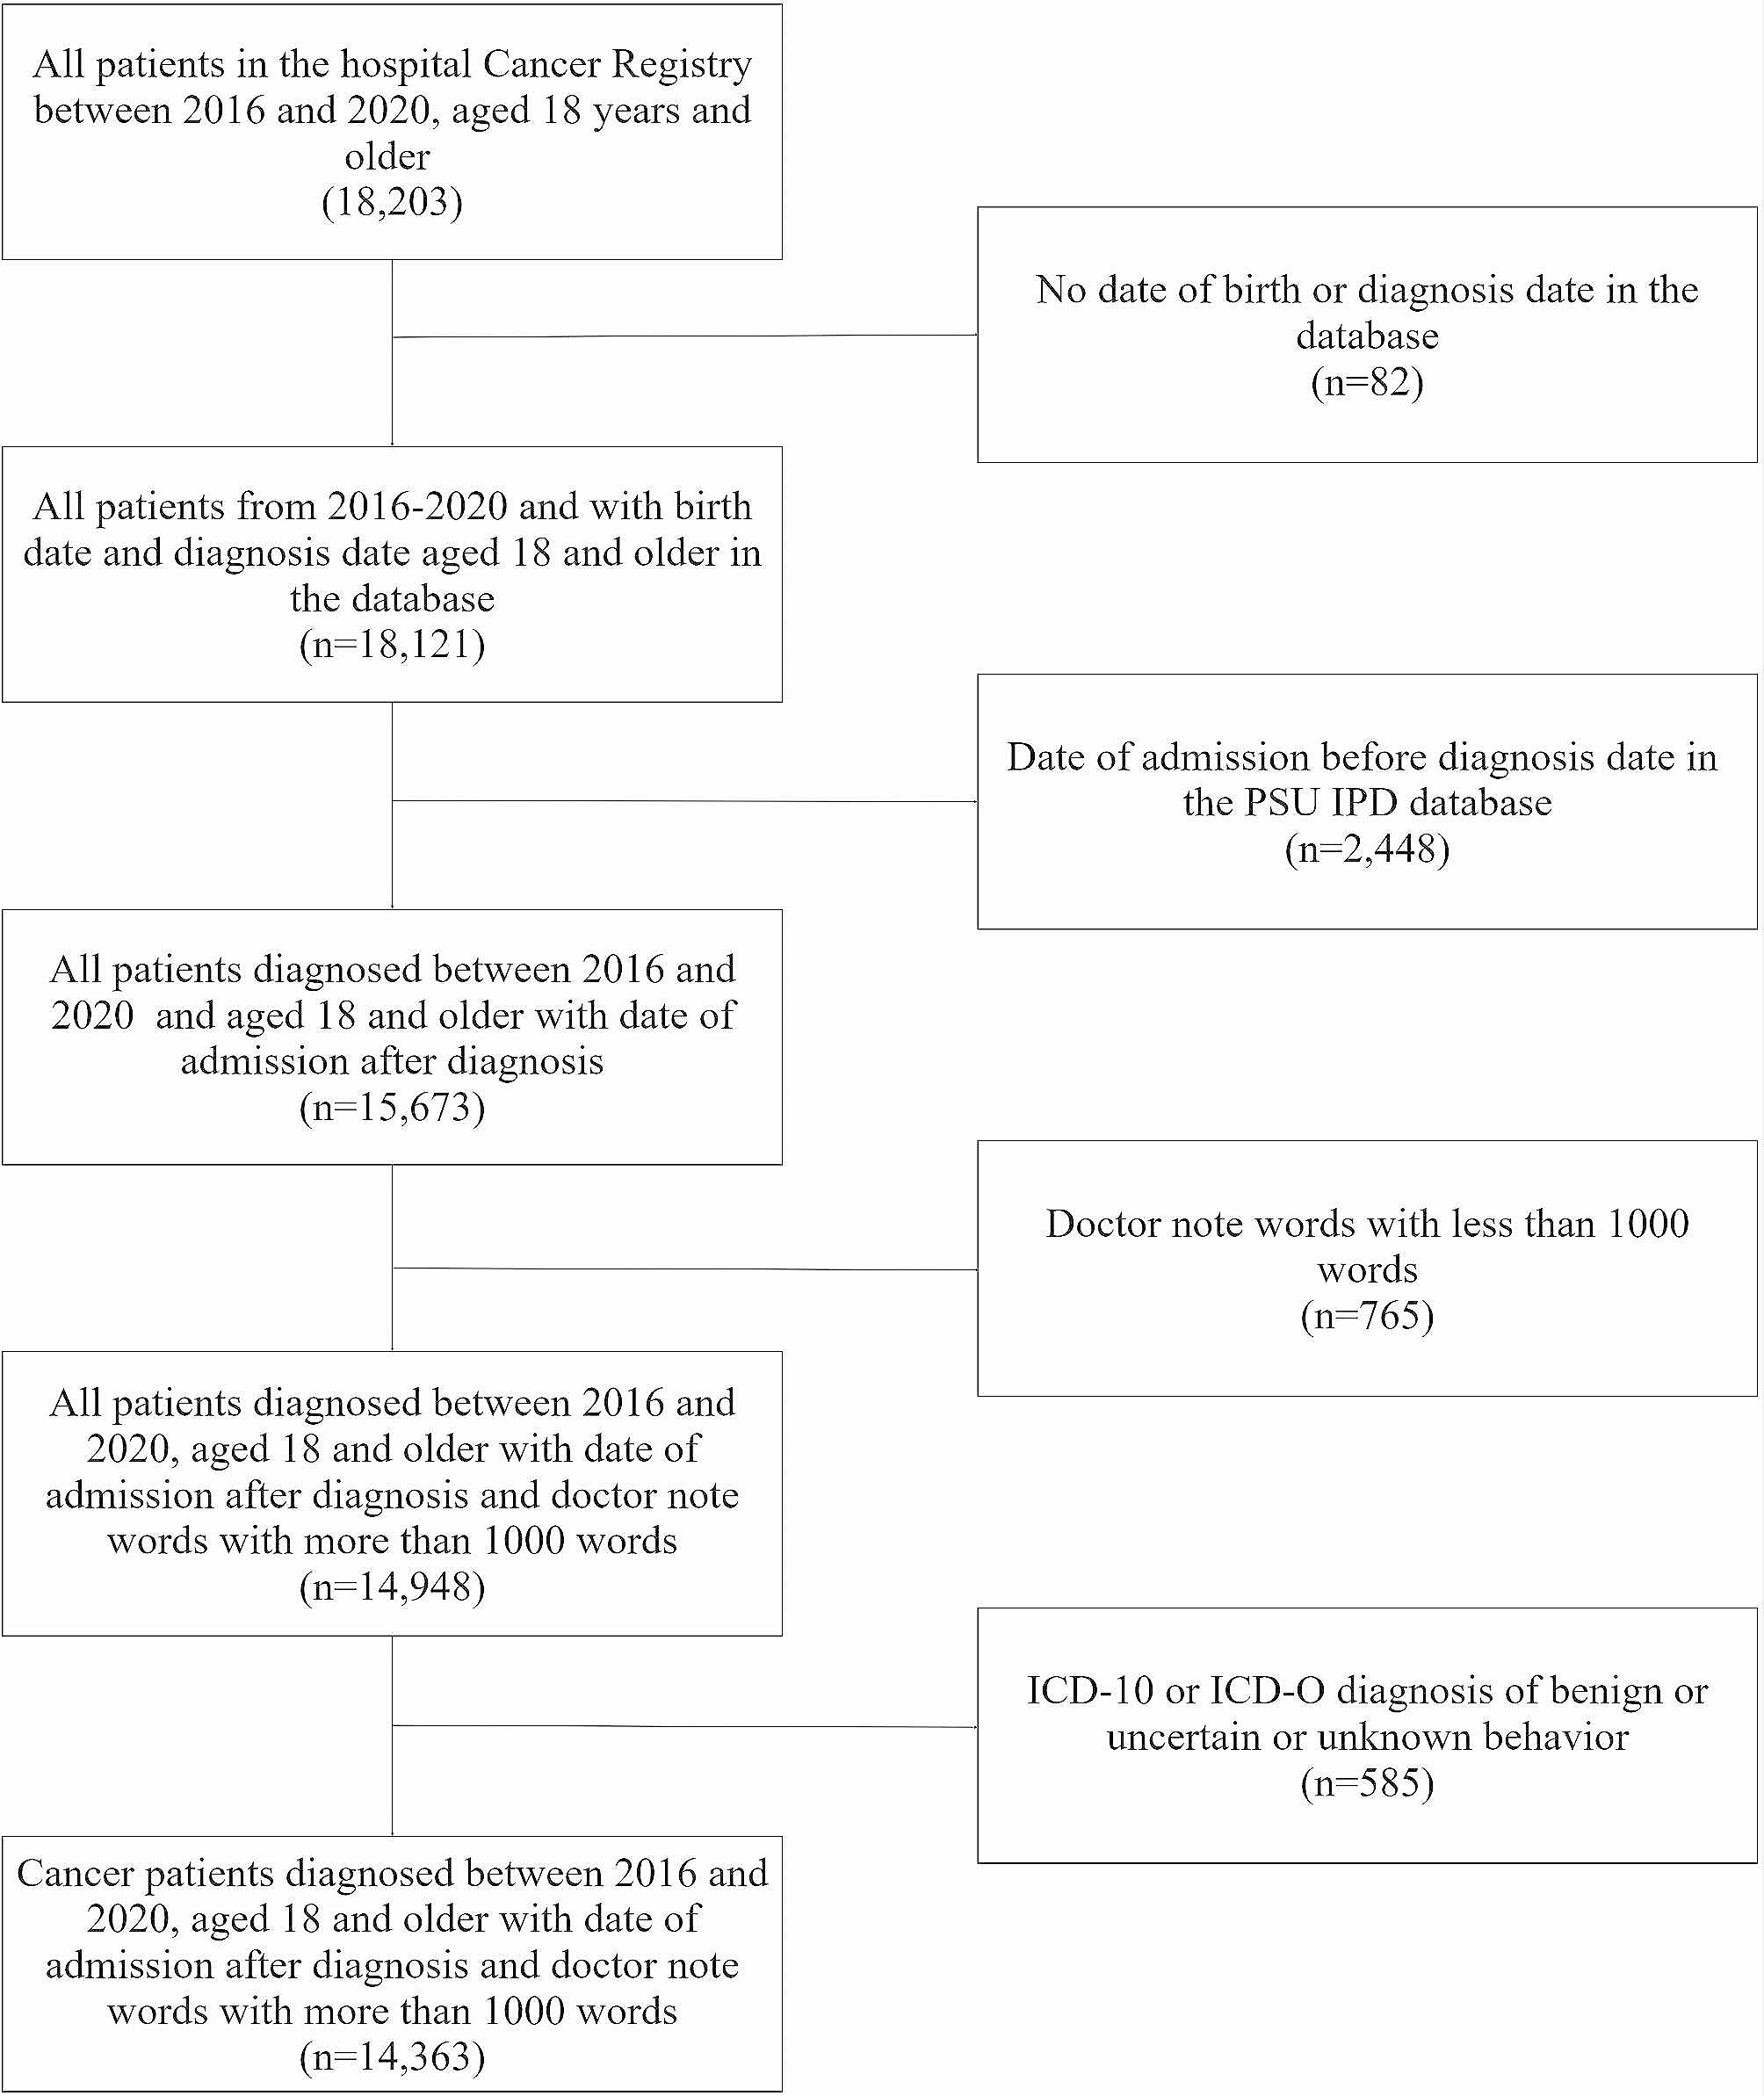 Identifying cancer patients who received palliative care using the SPICT-LIS in medical records: a rule-based algorithm and text-mining technique